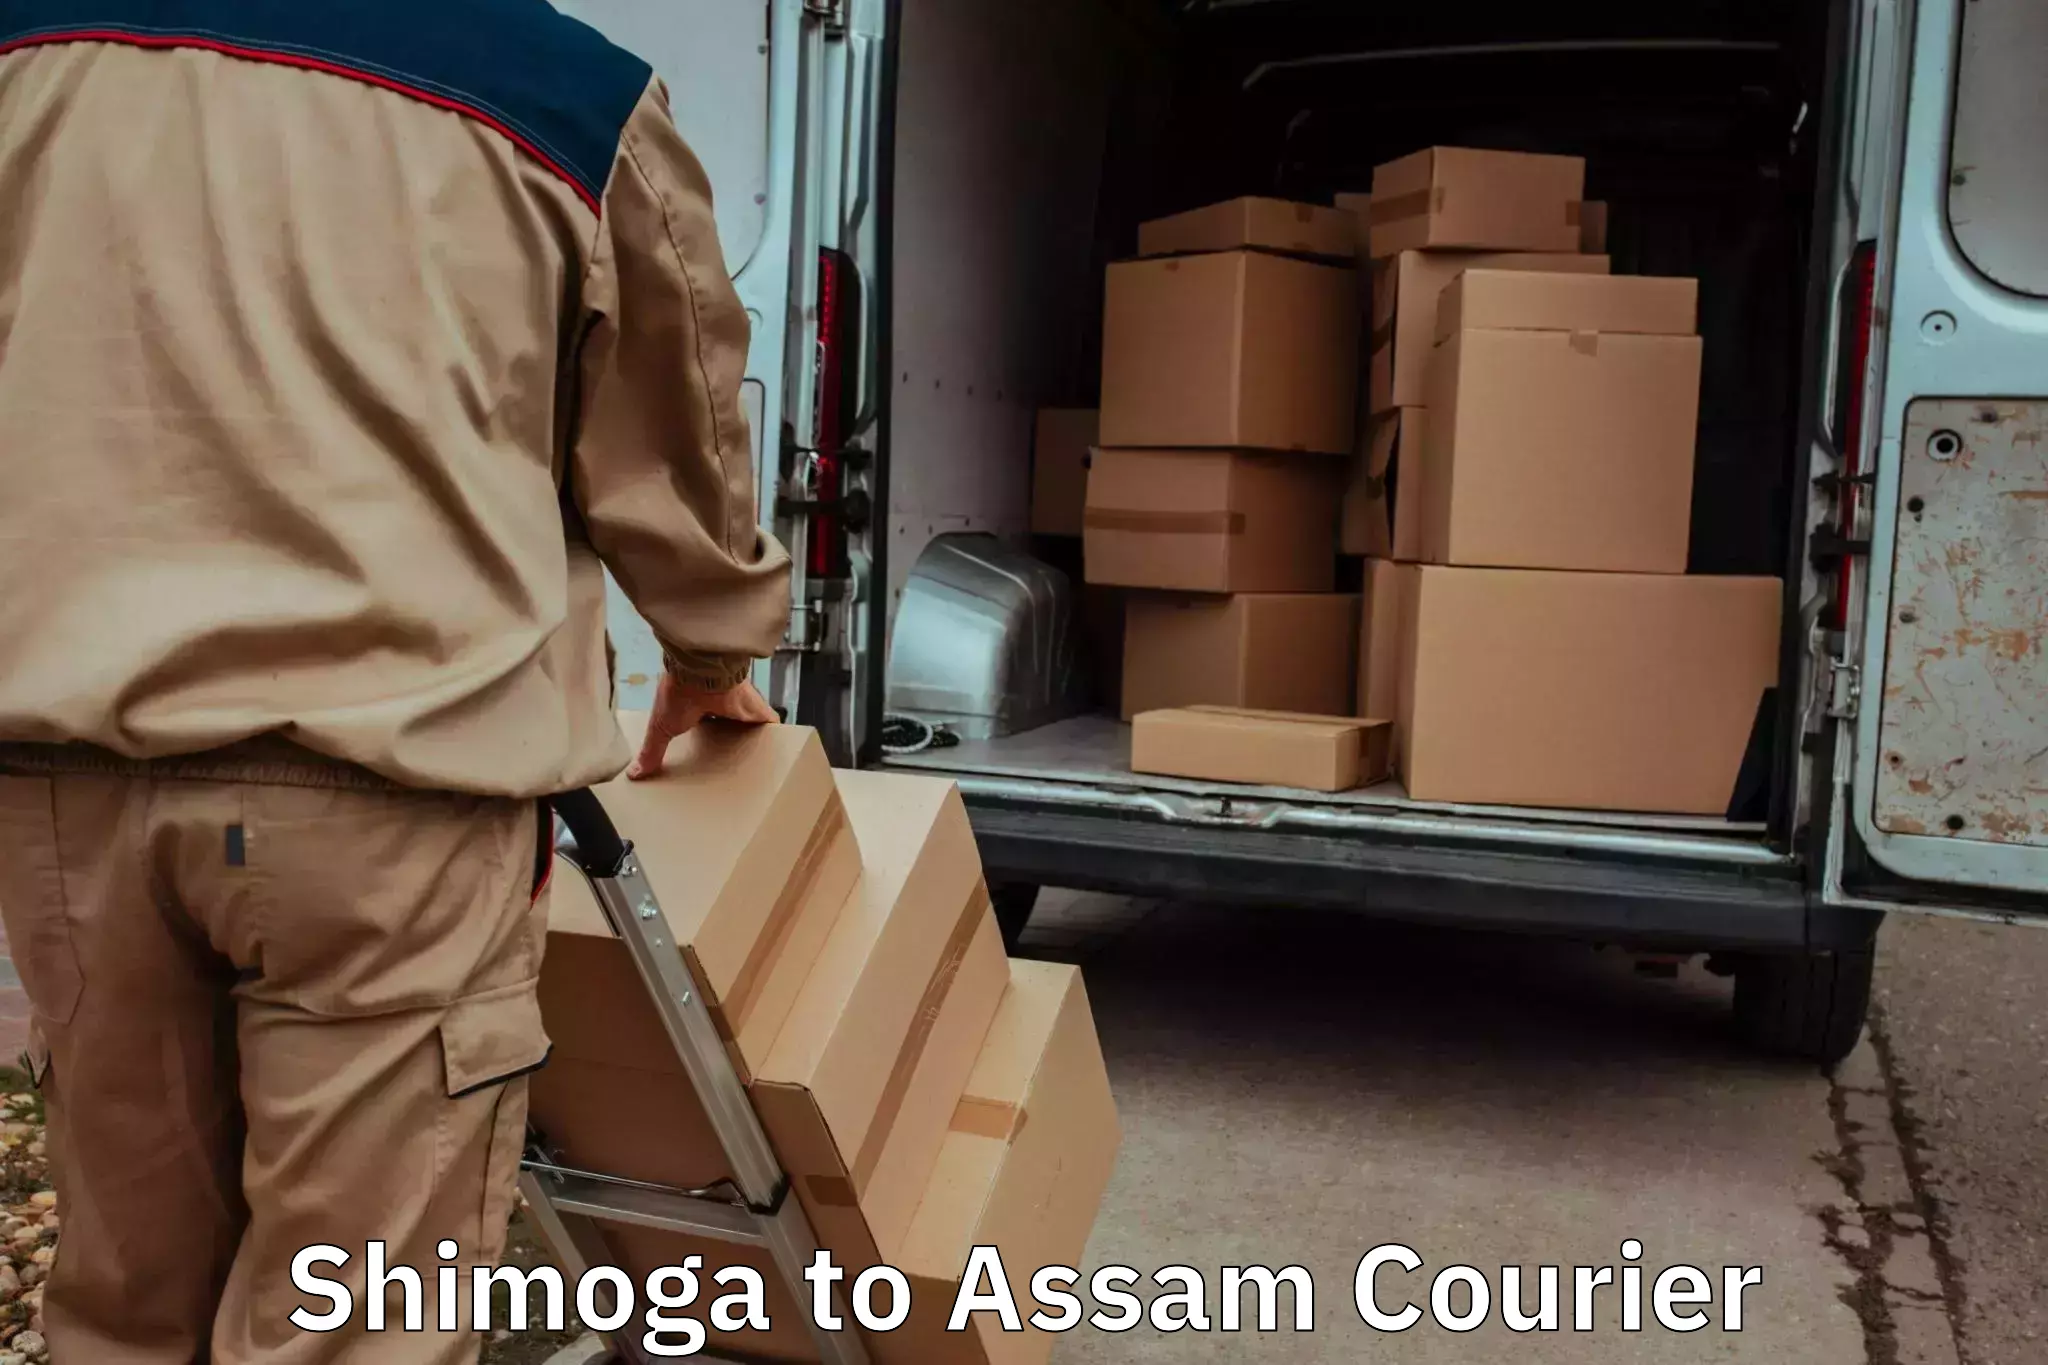 Trusted relocation experts Shimoga to Mayang